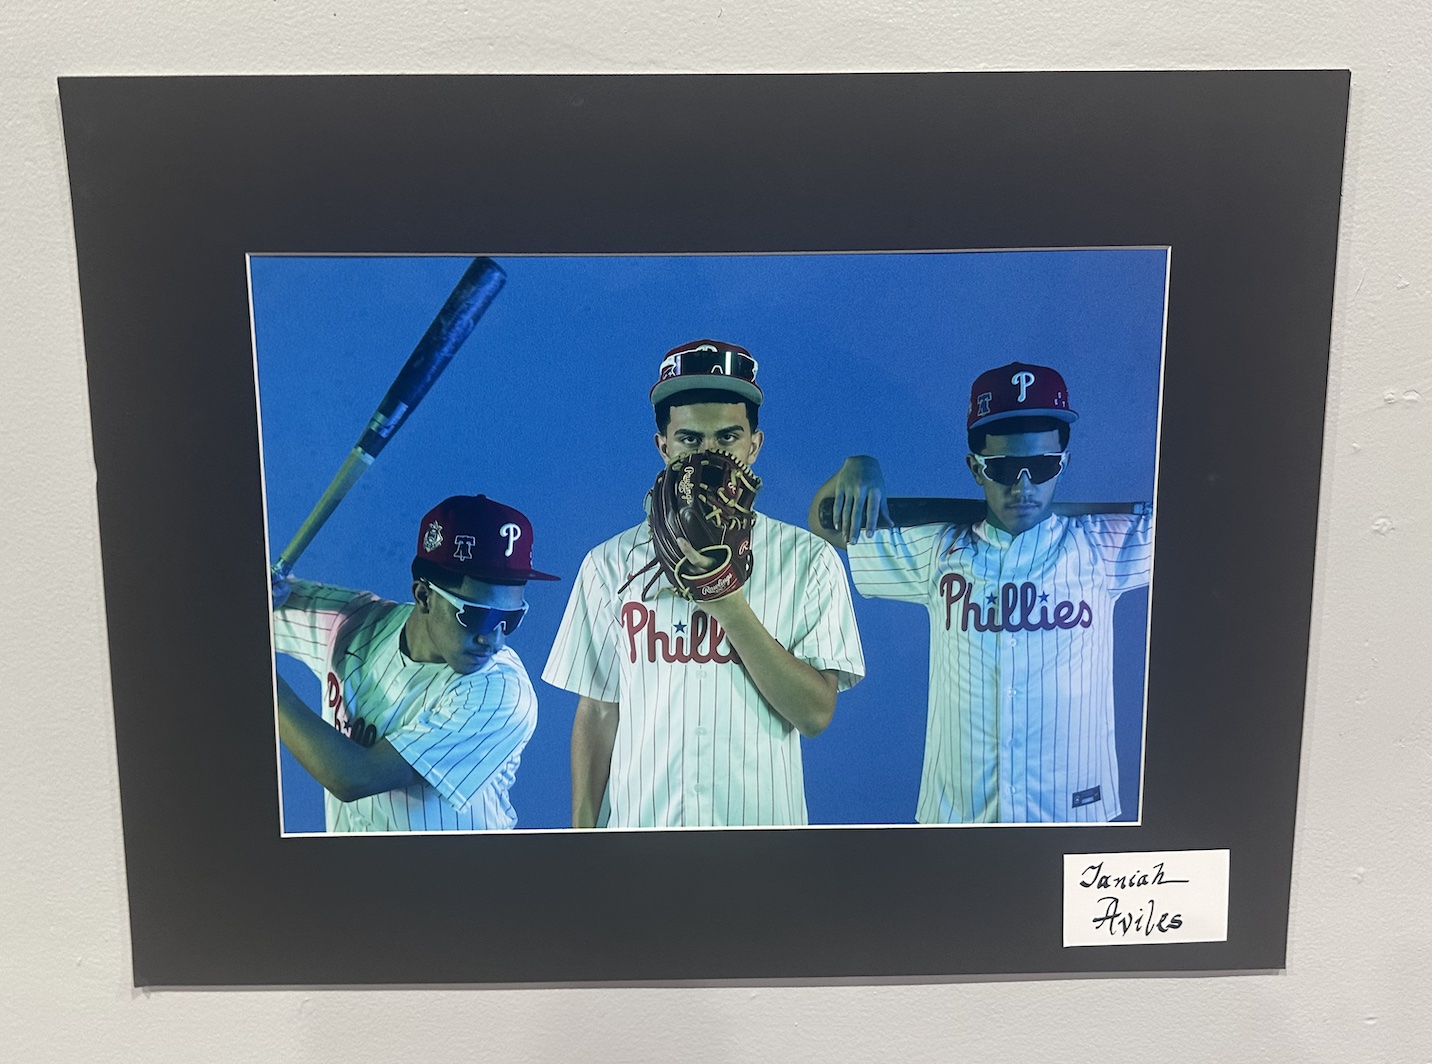 Artwork by student Janiah Aviles of a baseball player depicted three times over a blue background. On left, posed to hit a ball. Middle, holding glove in front of face to only show eyes. On right, holding baseball bat over shoulders with both hands.